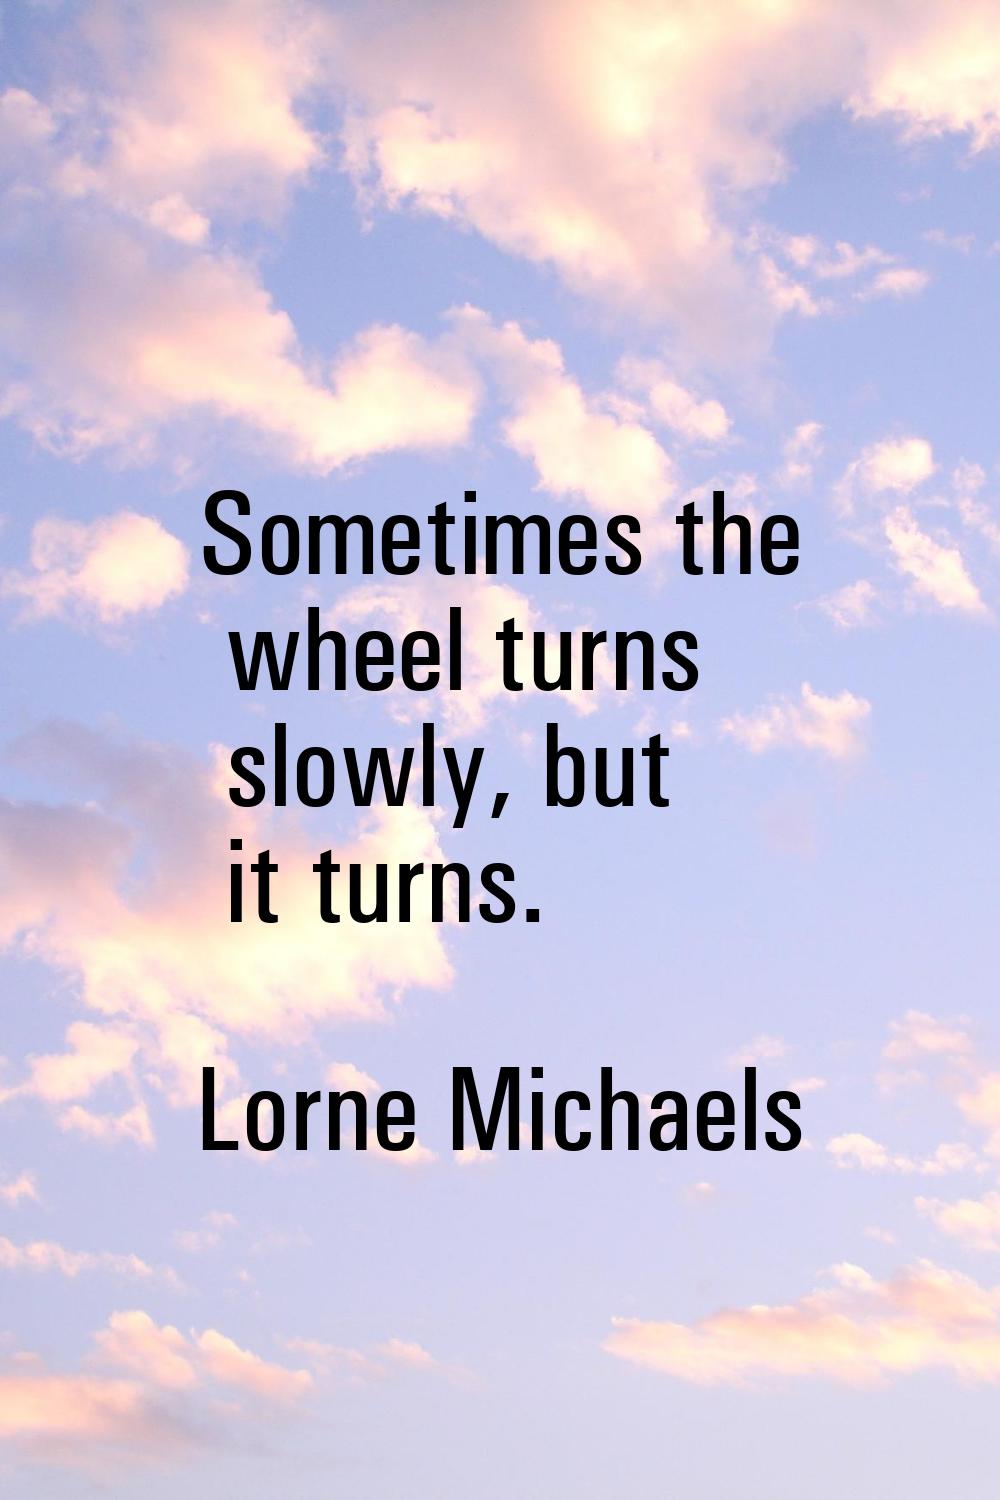 Sometimes the wheel turns slowly, but it turns.